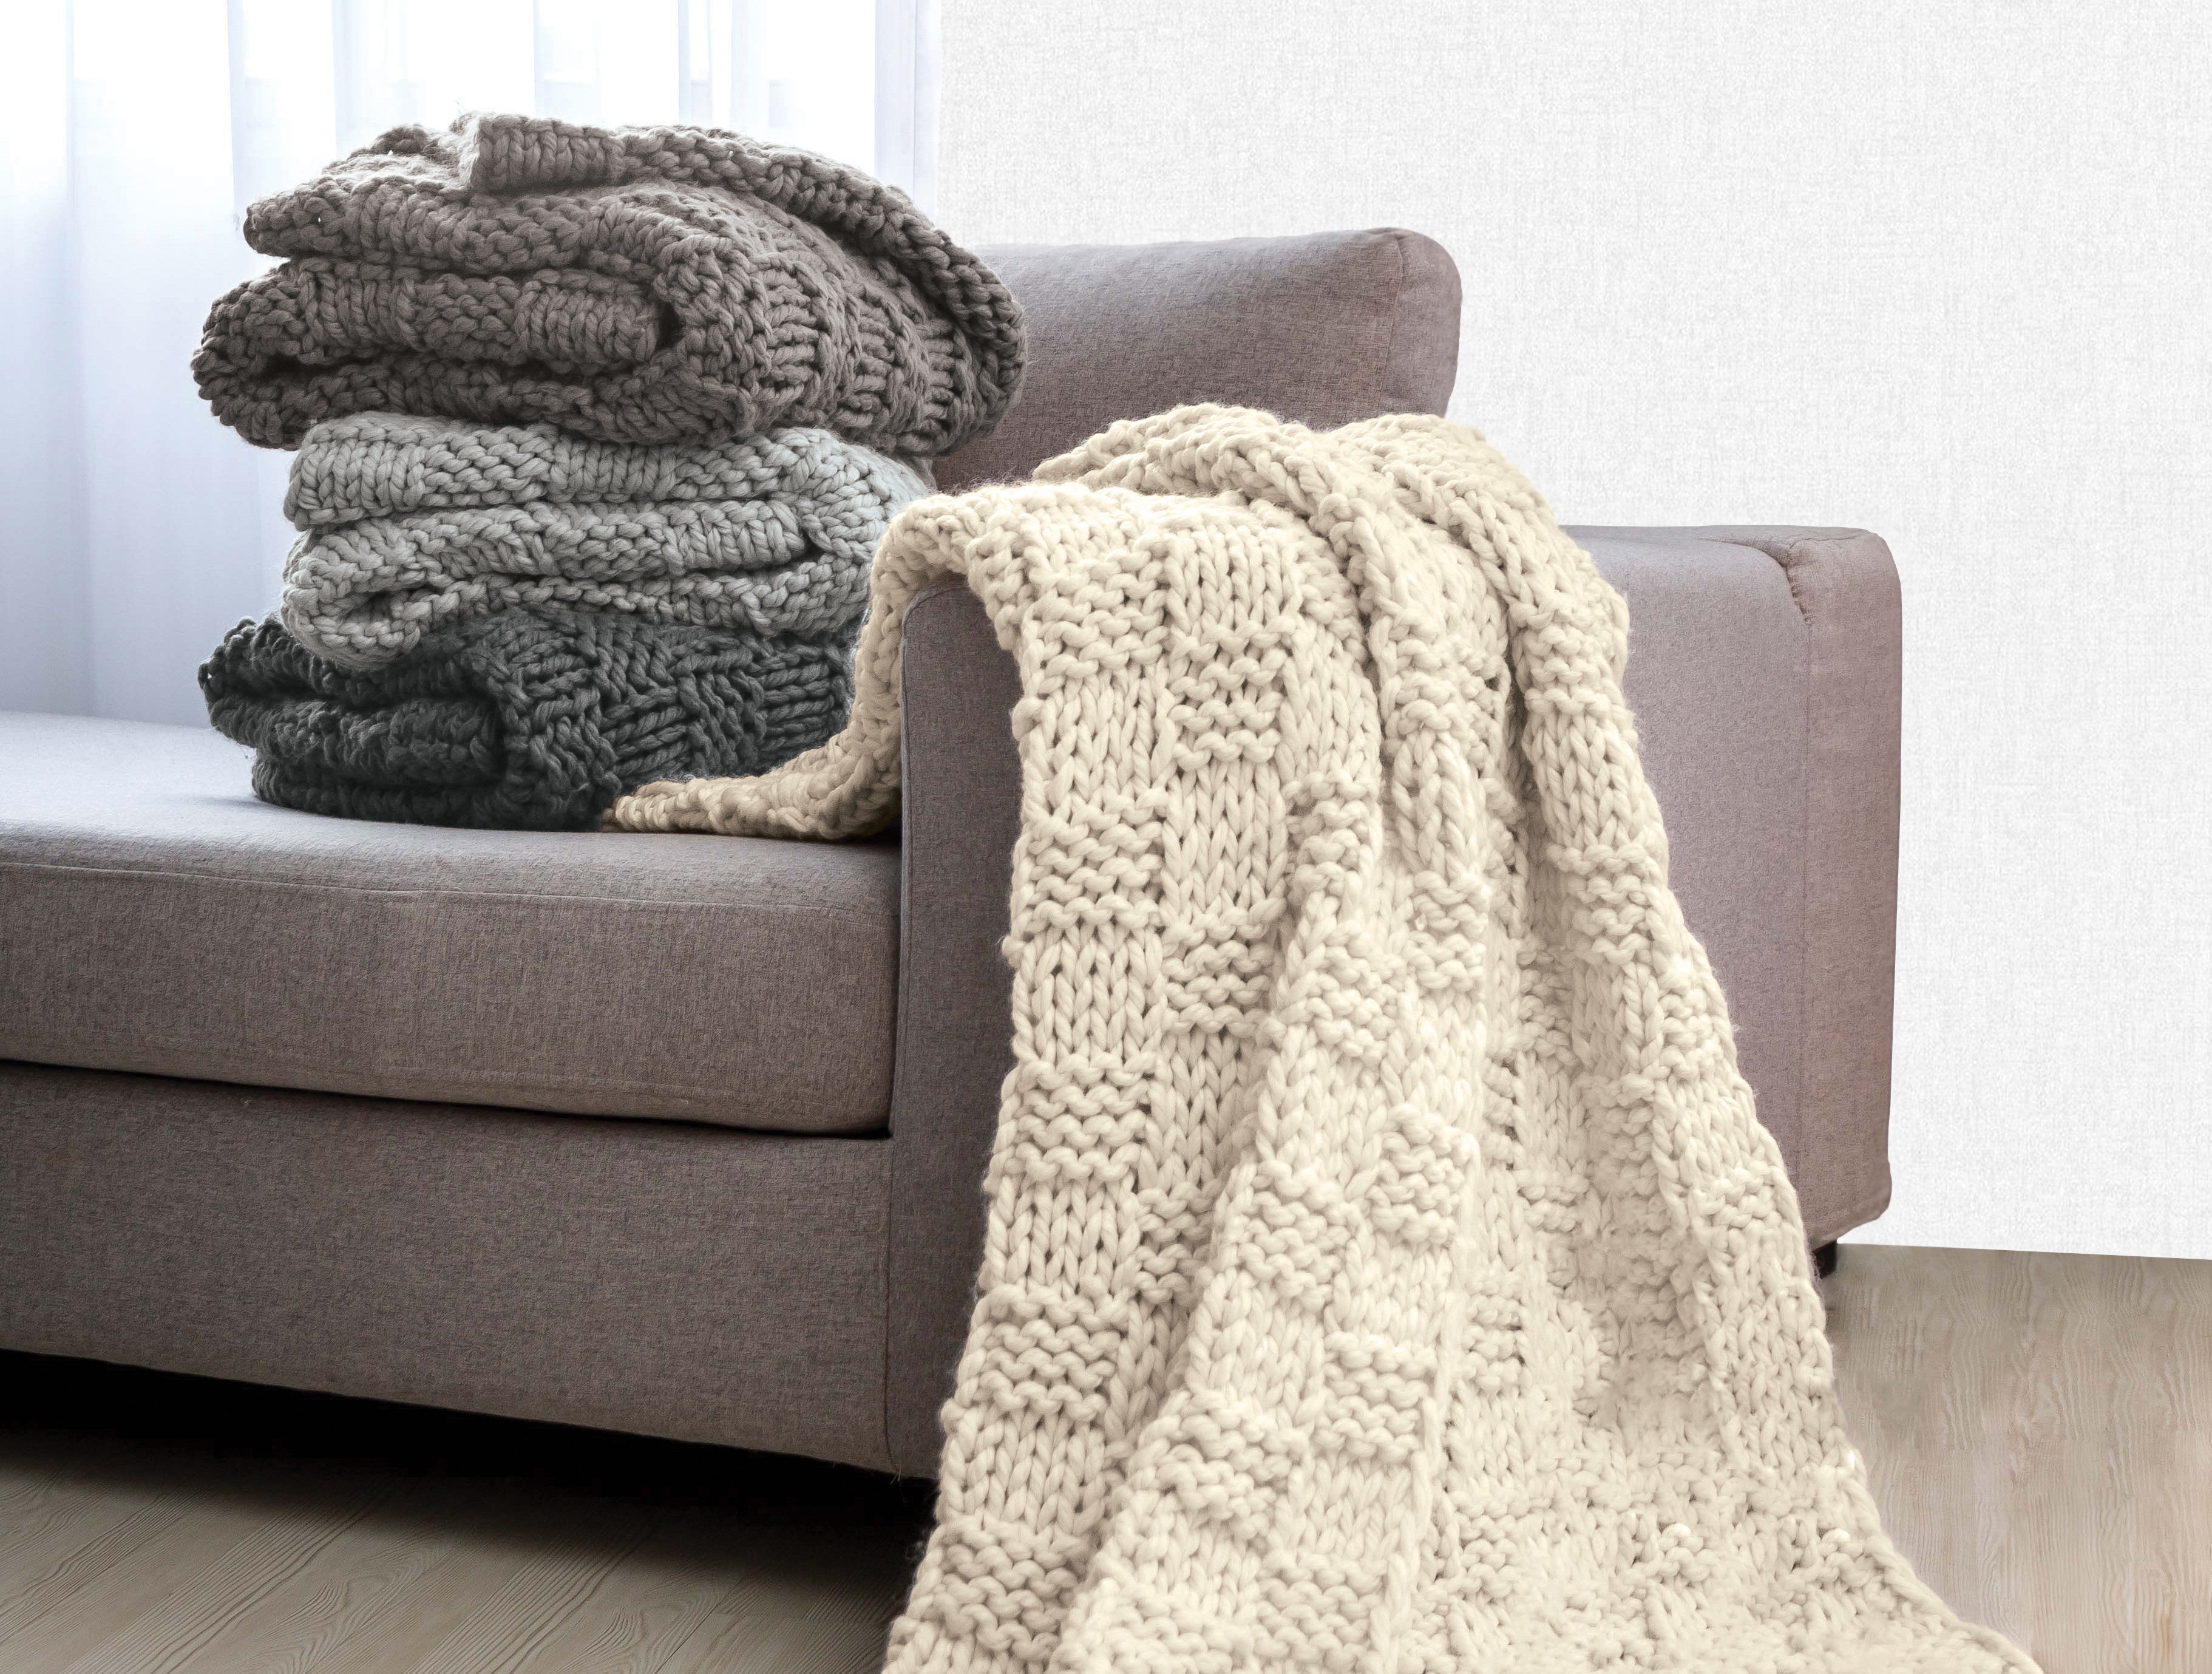 Let's Get Cozy - Bold, Functional Style of Throw Blankets - Ecletticos